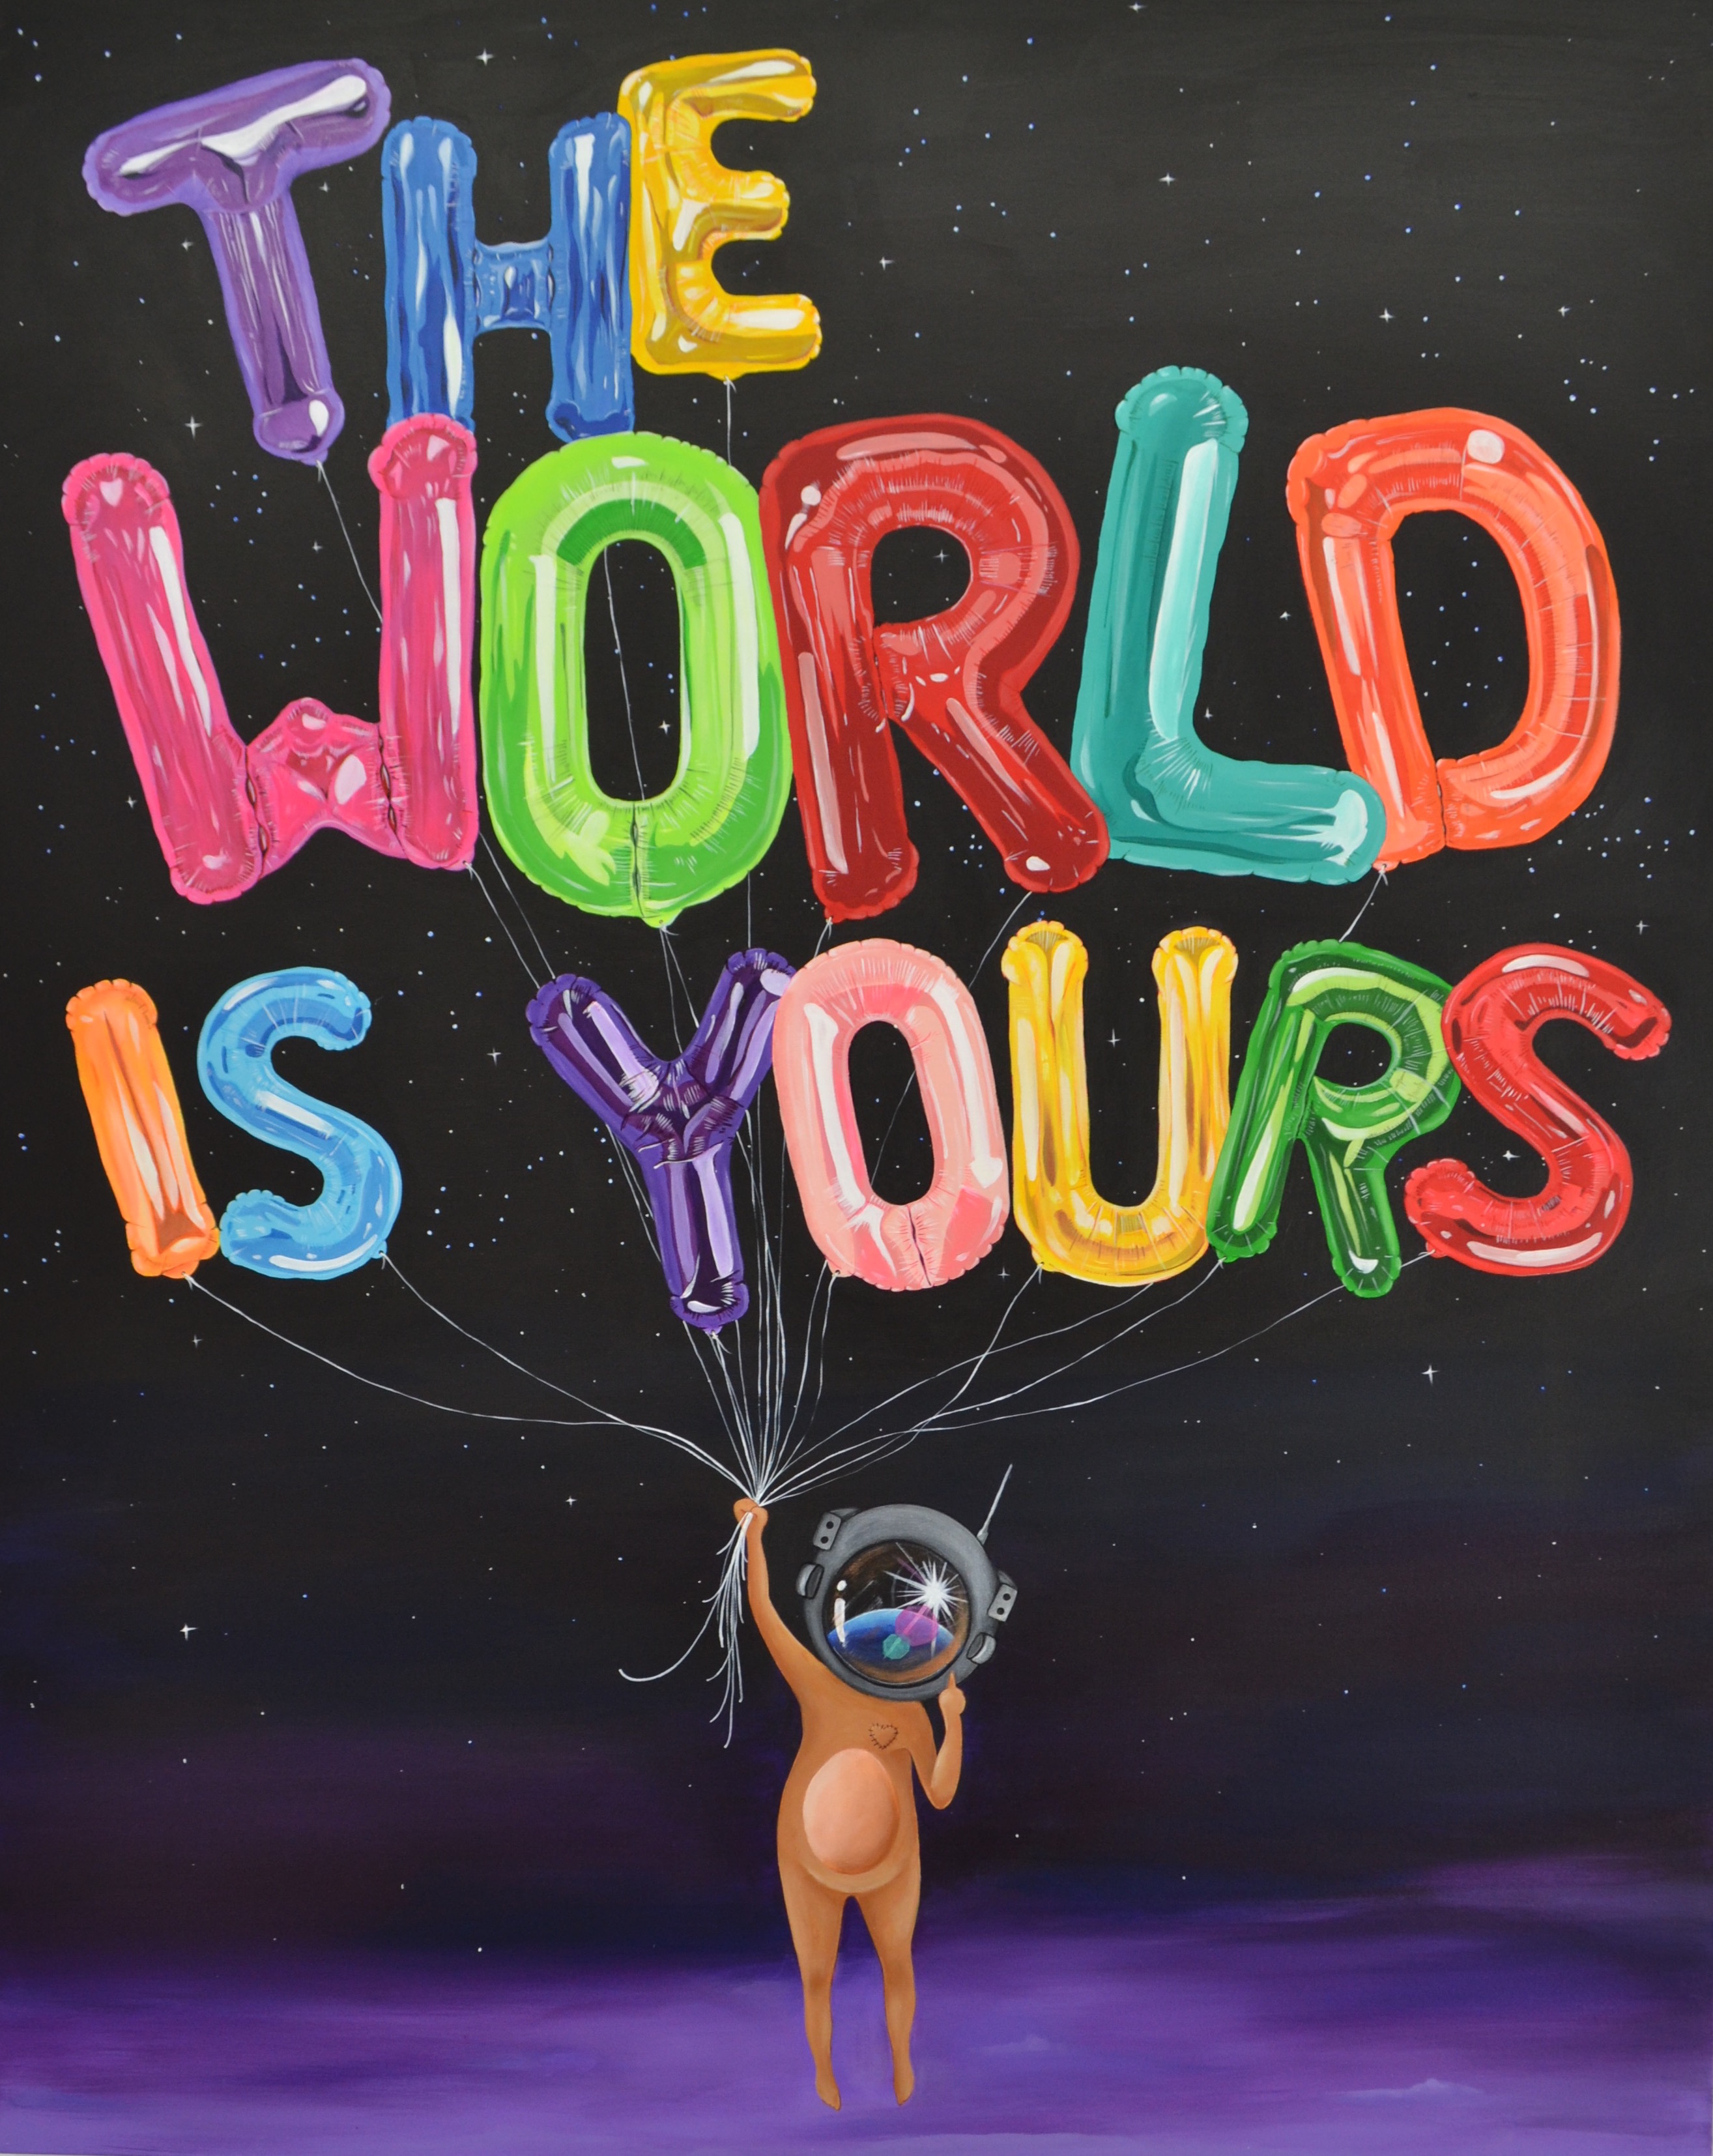 The World is Yours by Sue Tsai